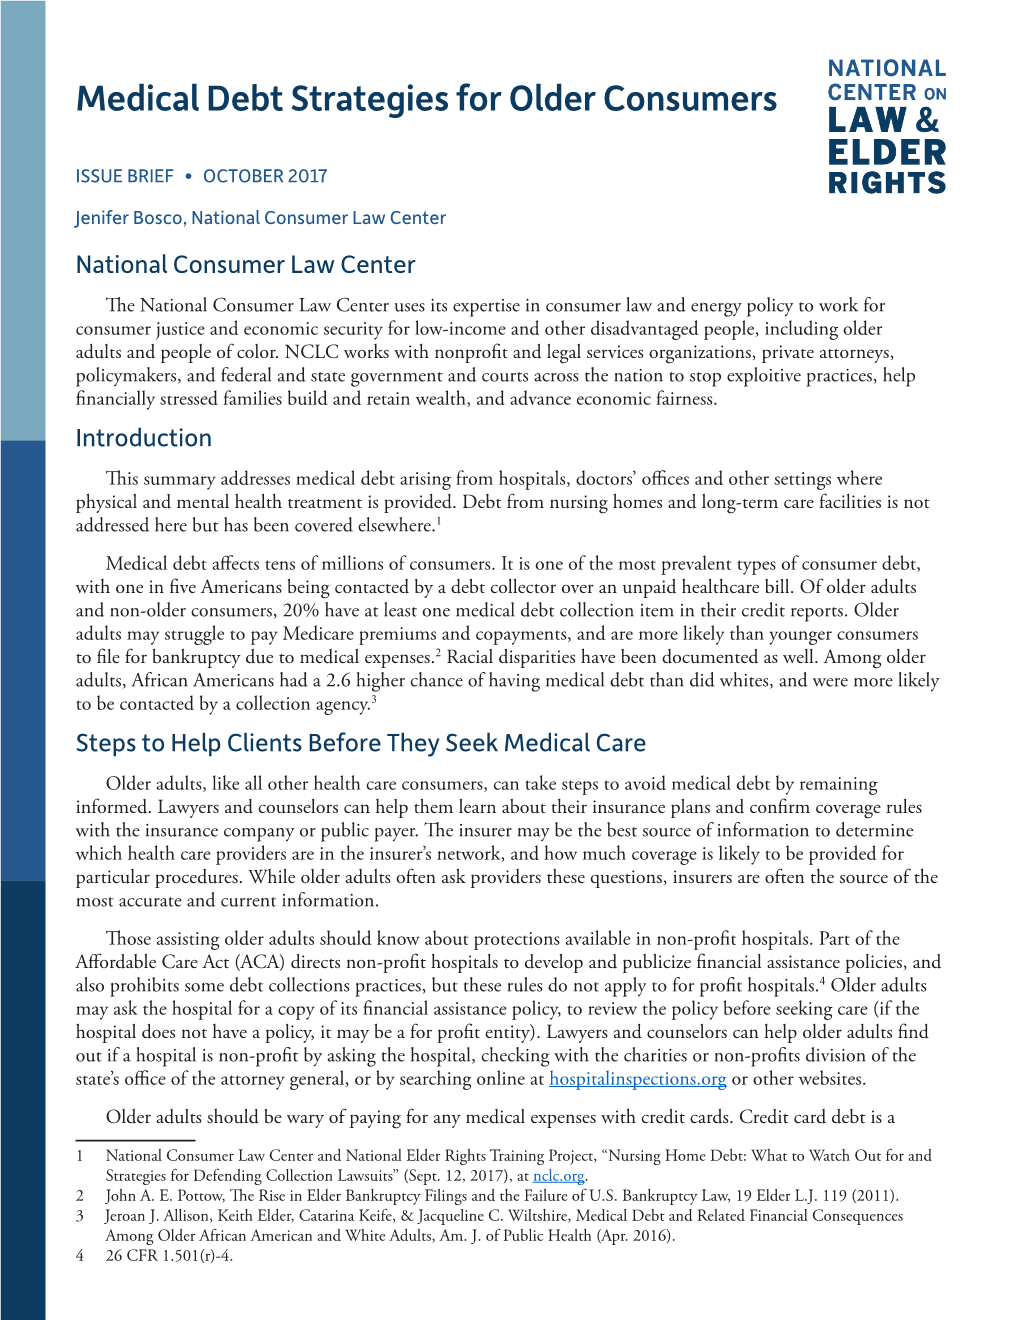 NCLER Issue Brief: Medical Debt Strategies for Older Consumers